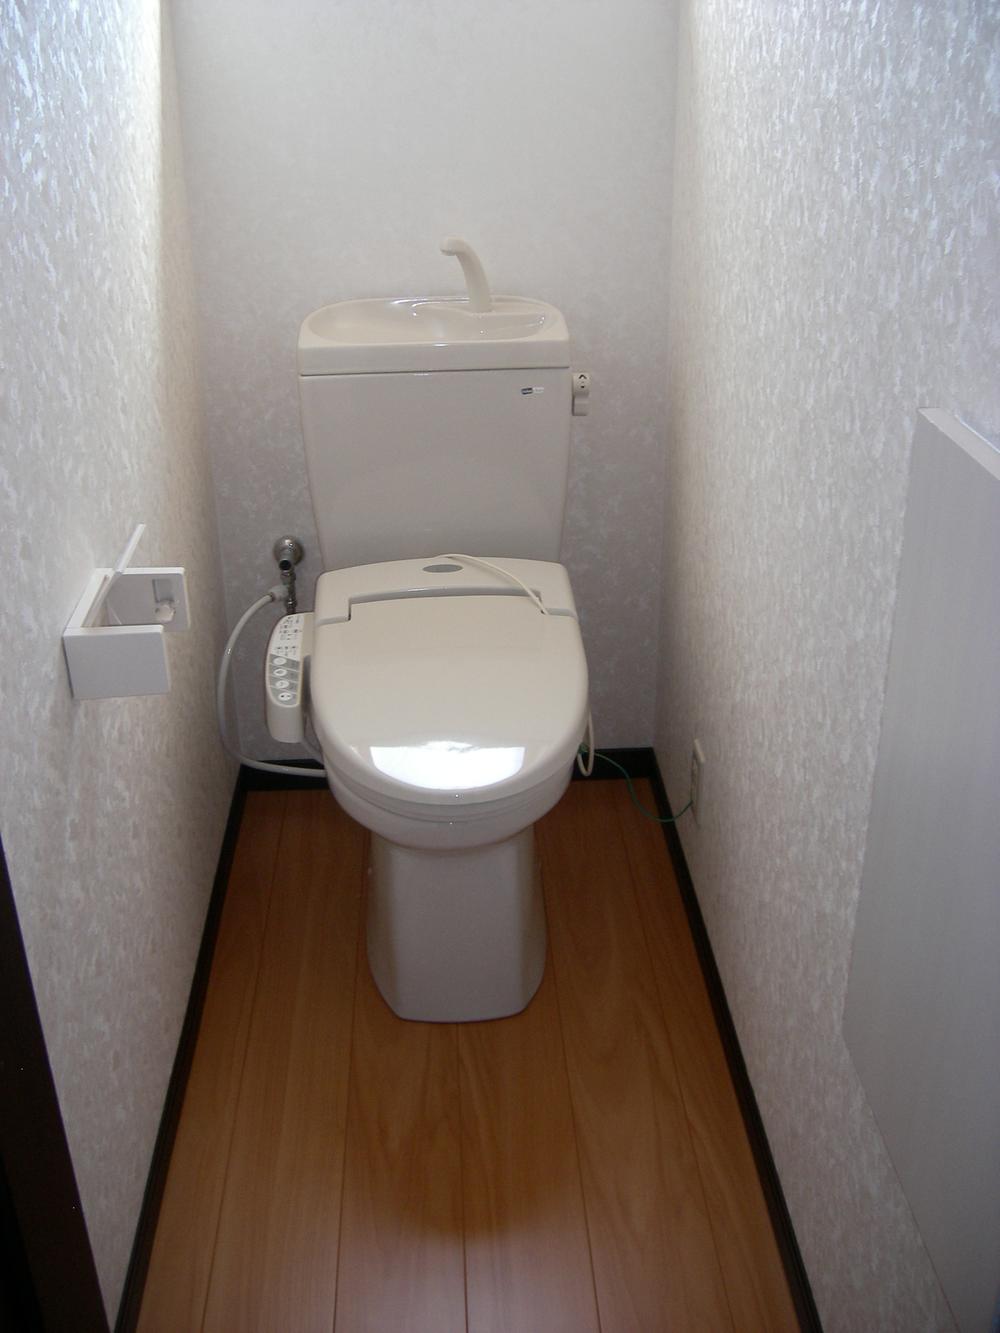 Toilet. There is a door with a glove on the wall with Washlet.